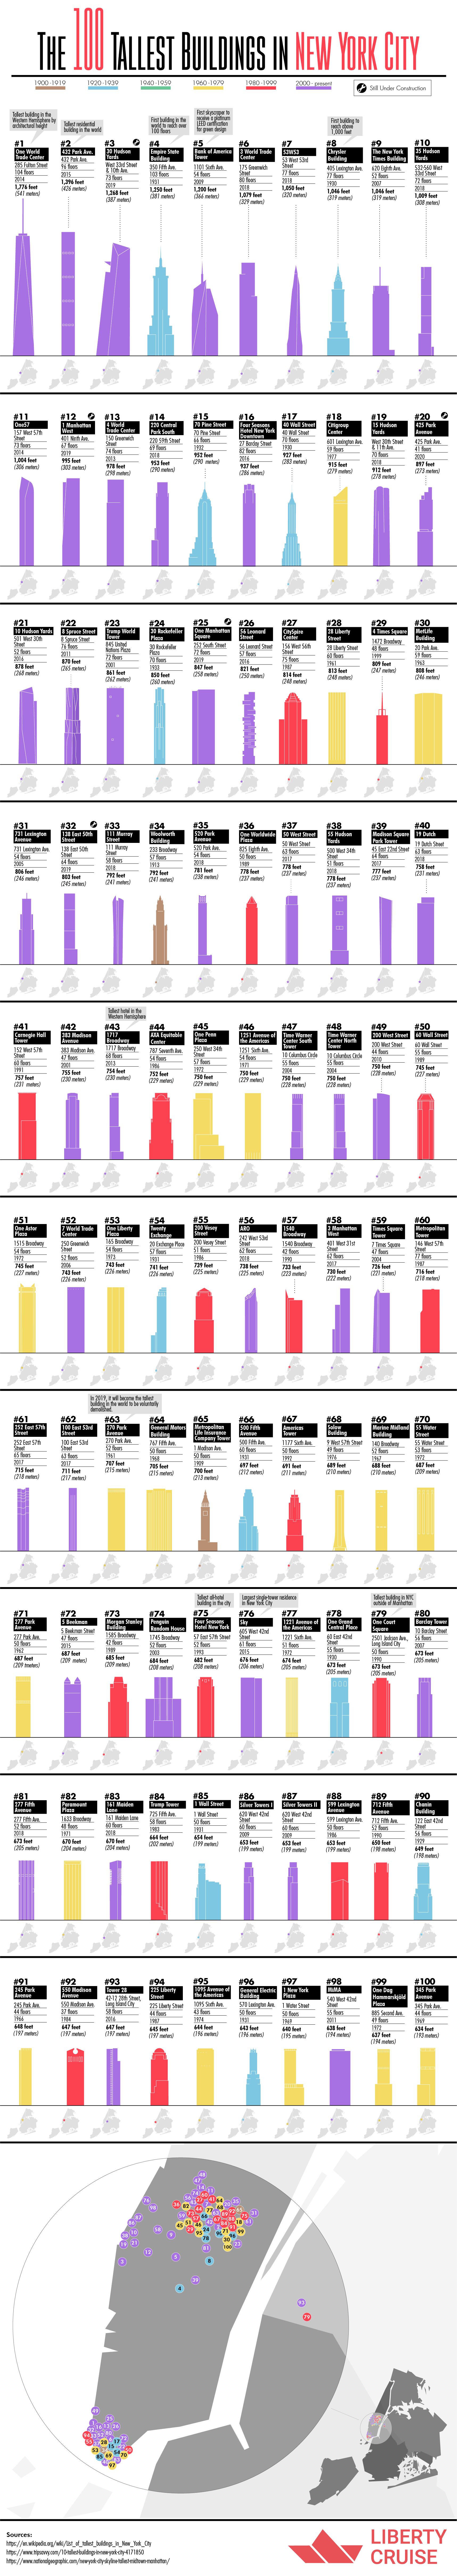 The 100 Tallest Buildings in New York City